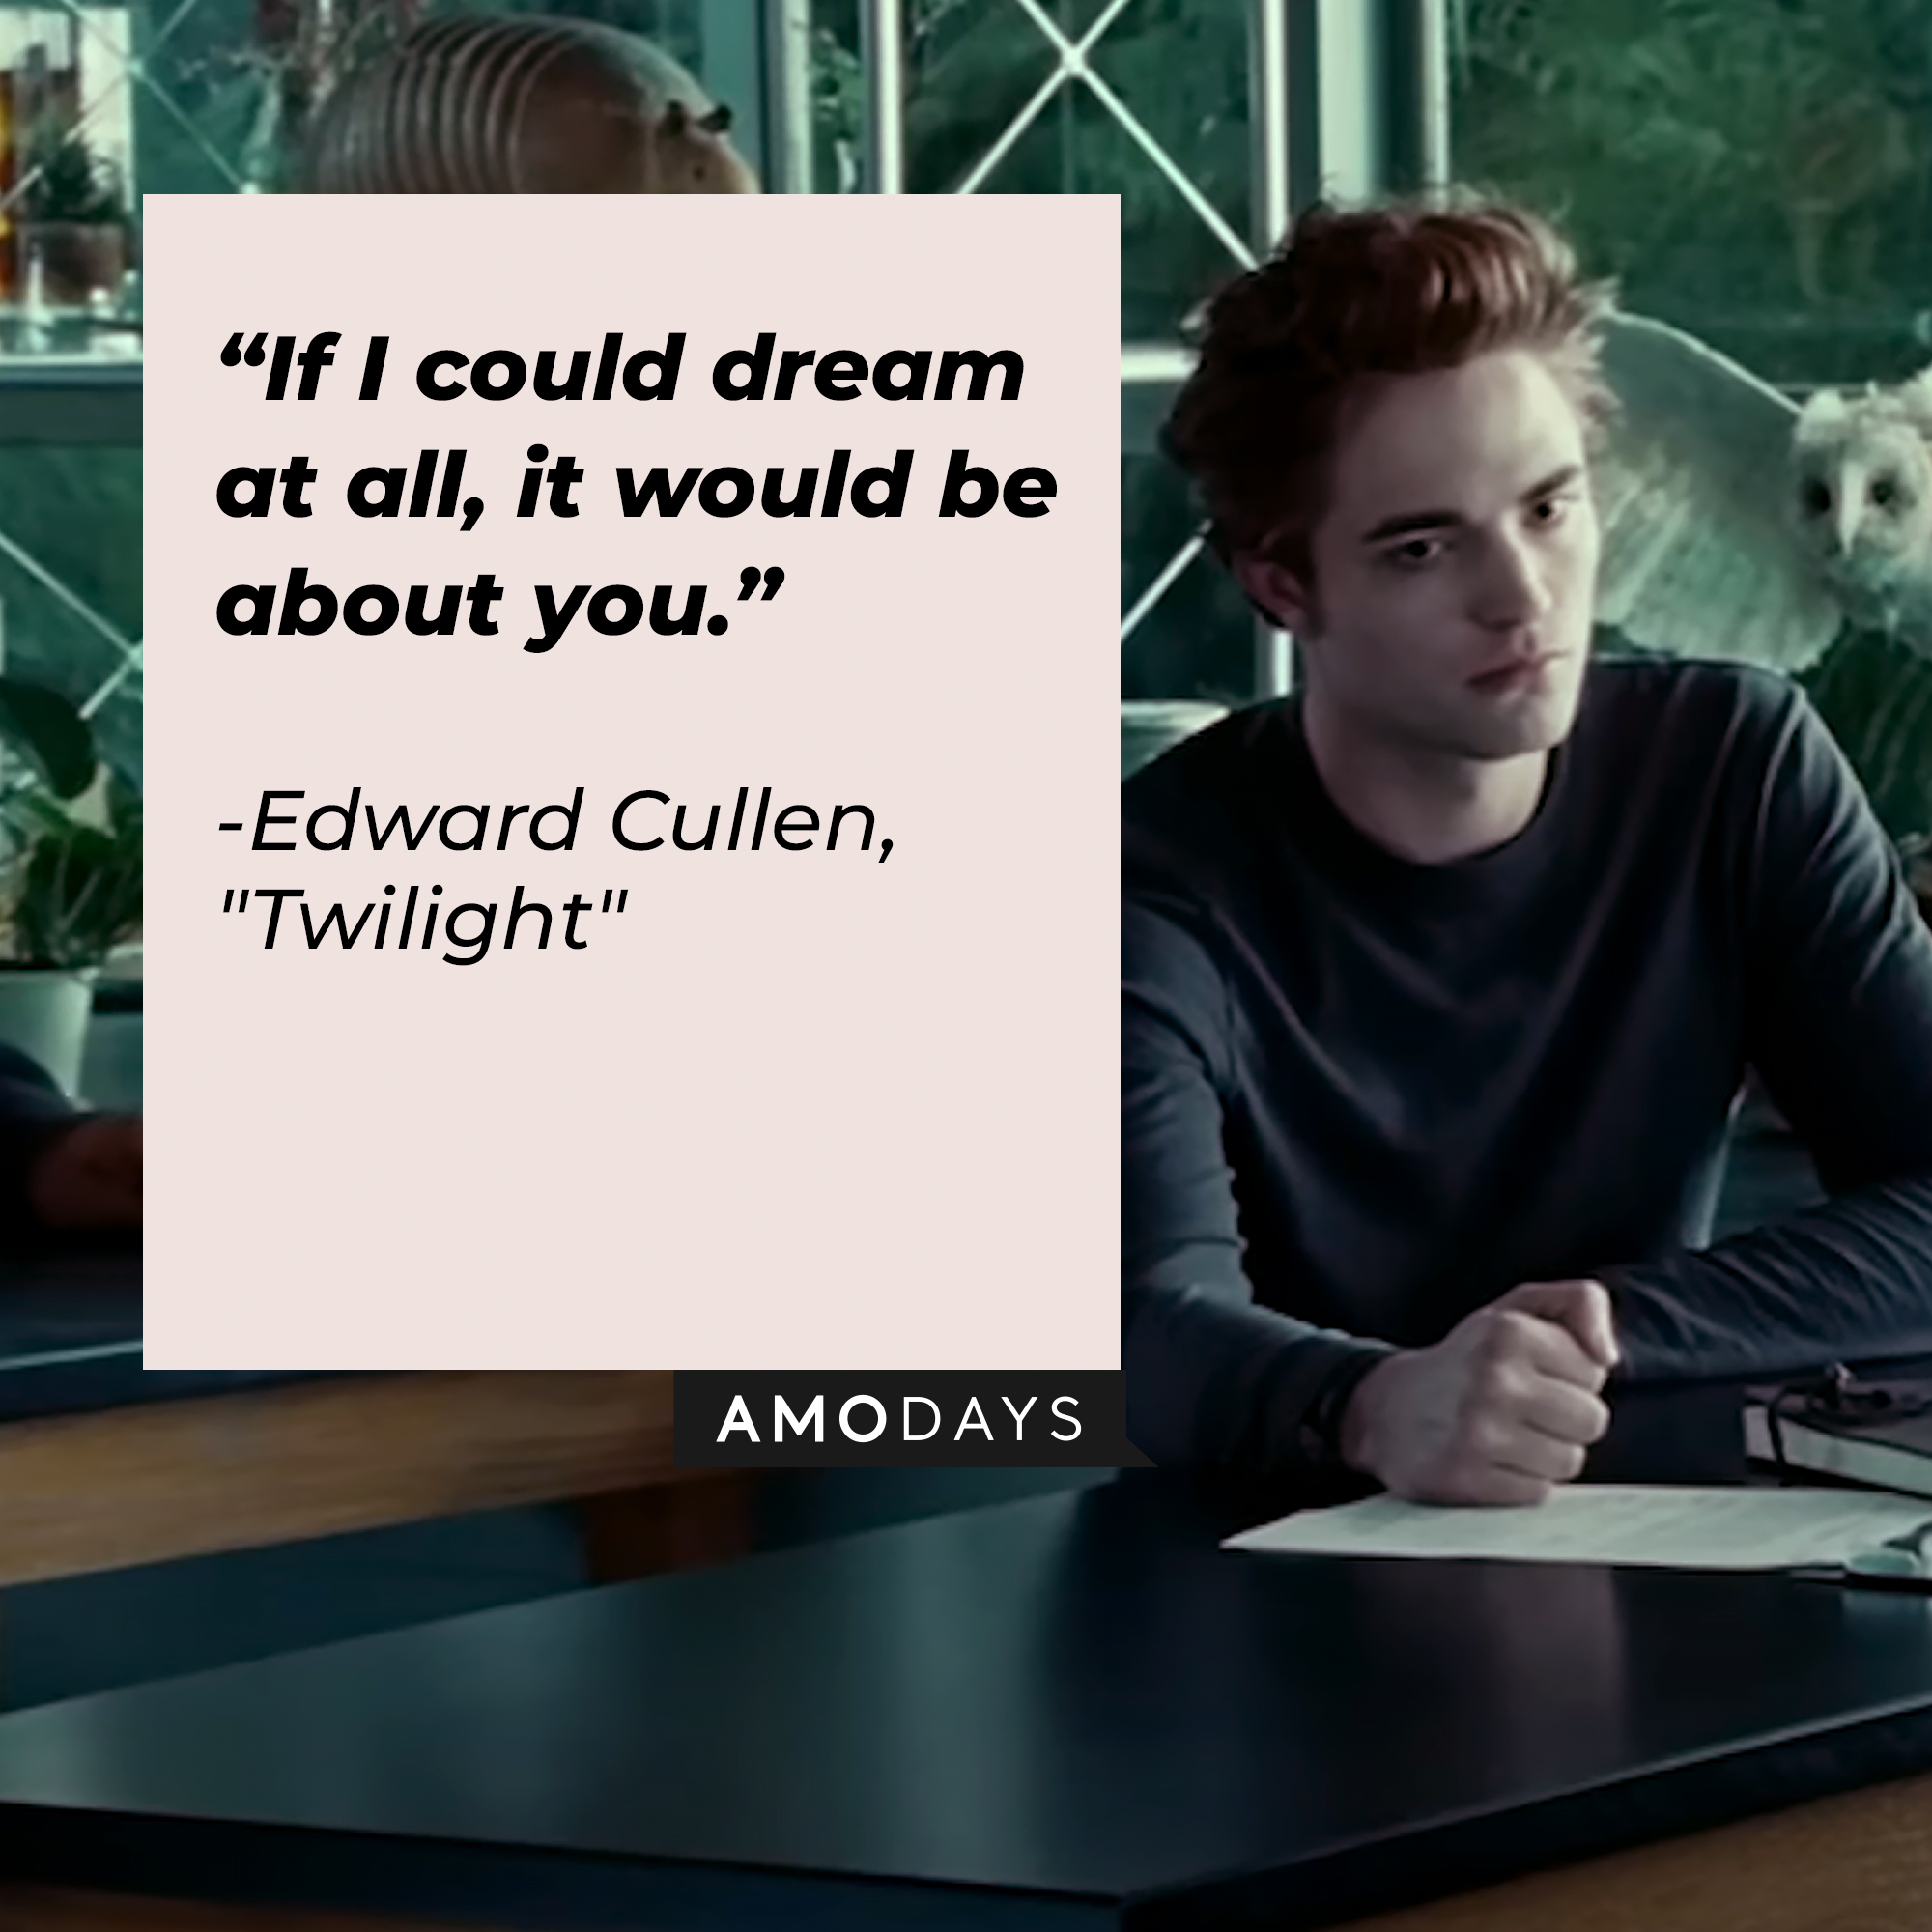 Edward Cullen with his quote: “If I could dream at all, it would be about you.” | Source: Facebook.com/twilight